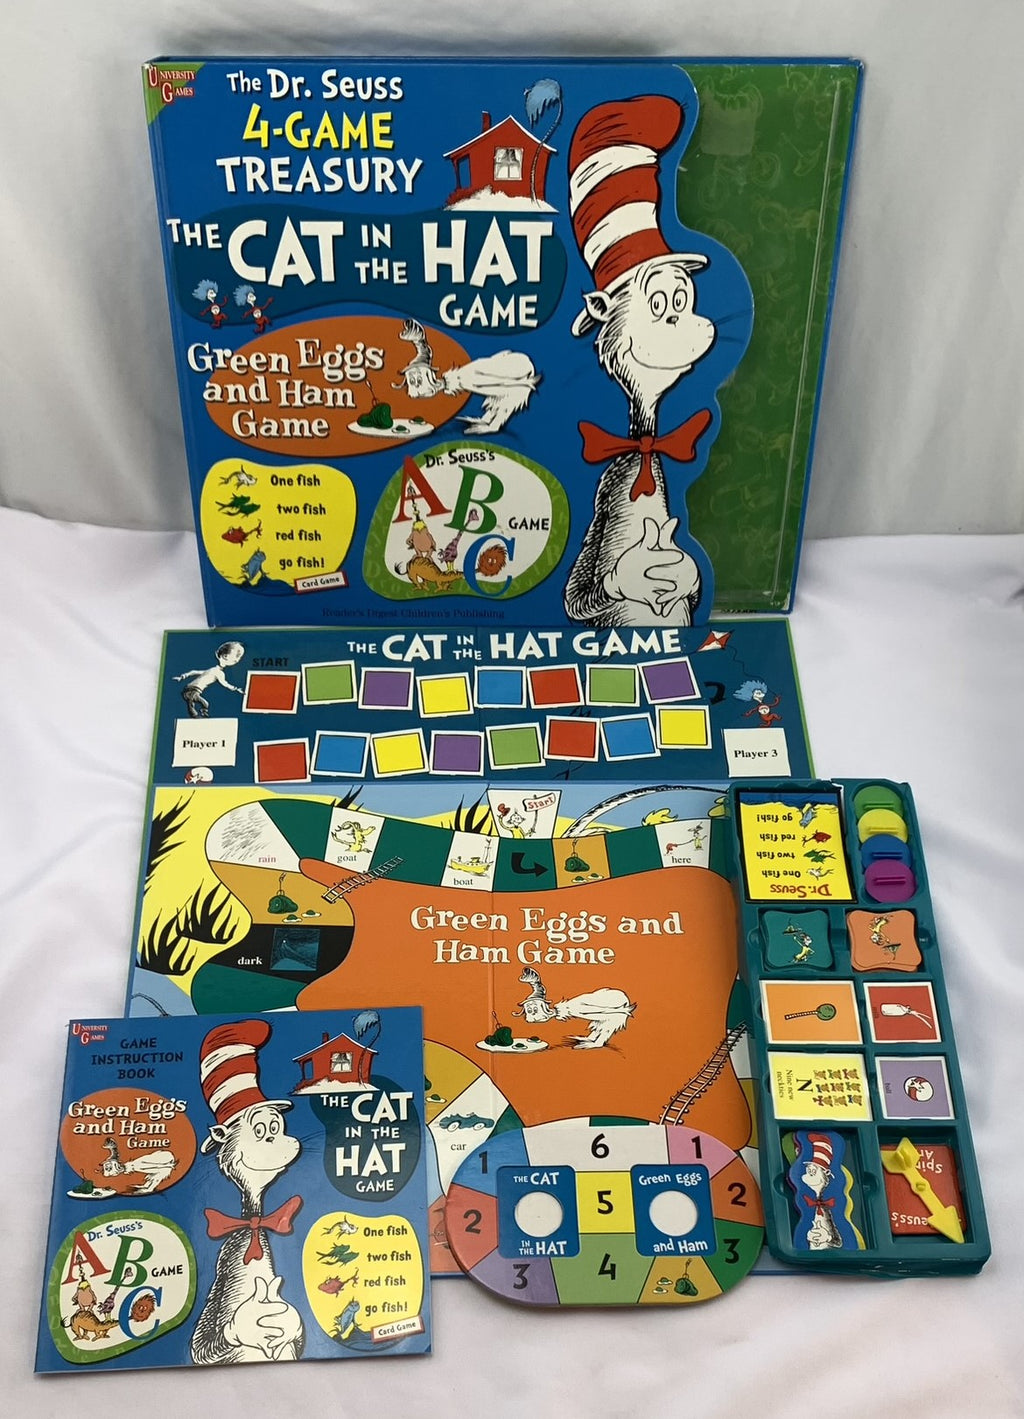 Dr. Seuss 4 Game Treasury Cat in the Hat, Green Eggs and Ham, One Fish, ABC's - 1996 - University Games - Great Condition